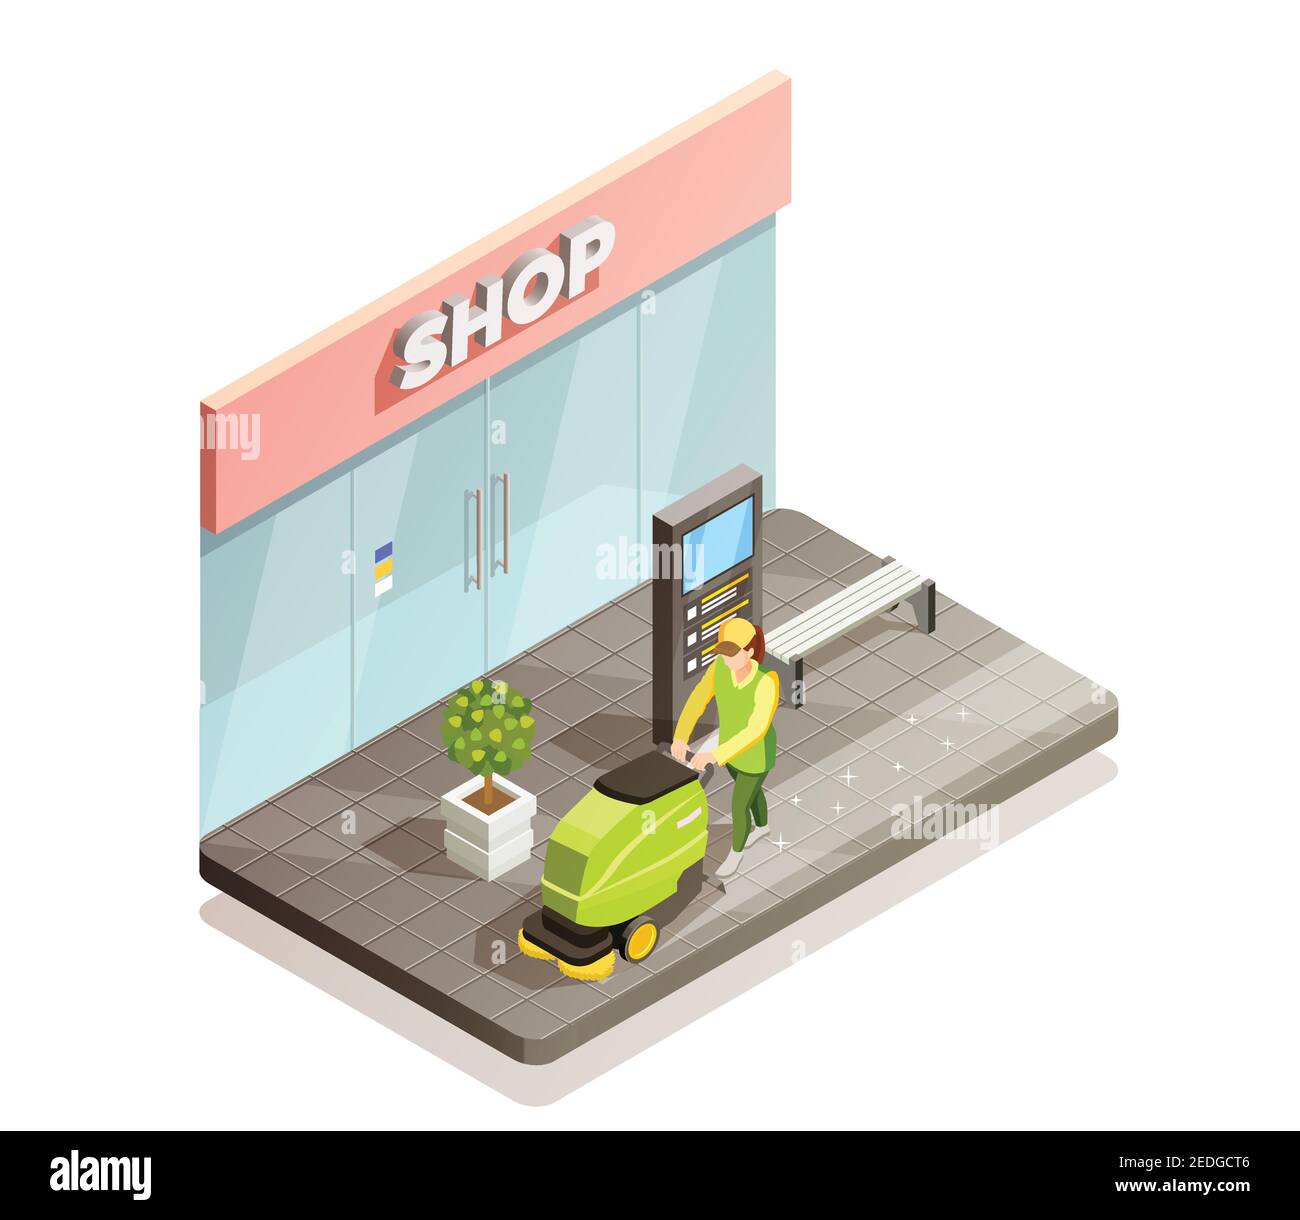 Cleaning isometric design composition with men vacuuming paving slabs near shop vector illustration Stock Vector